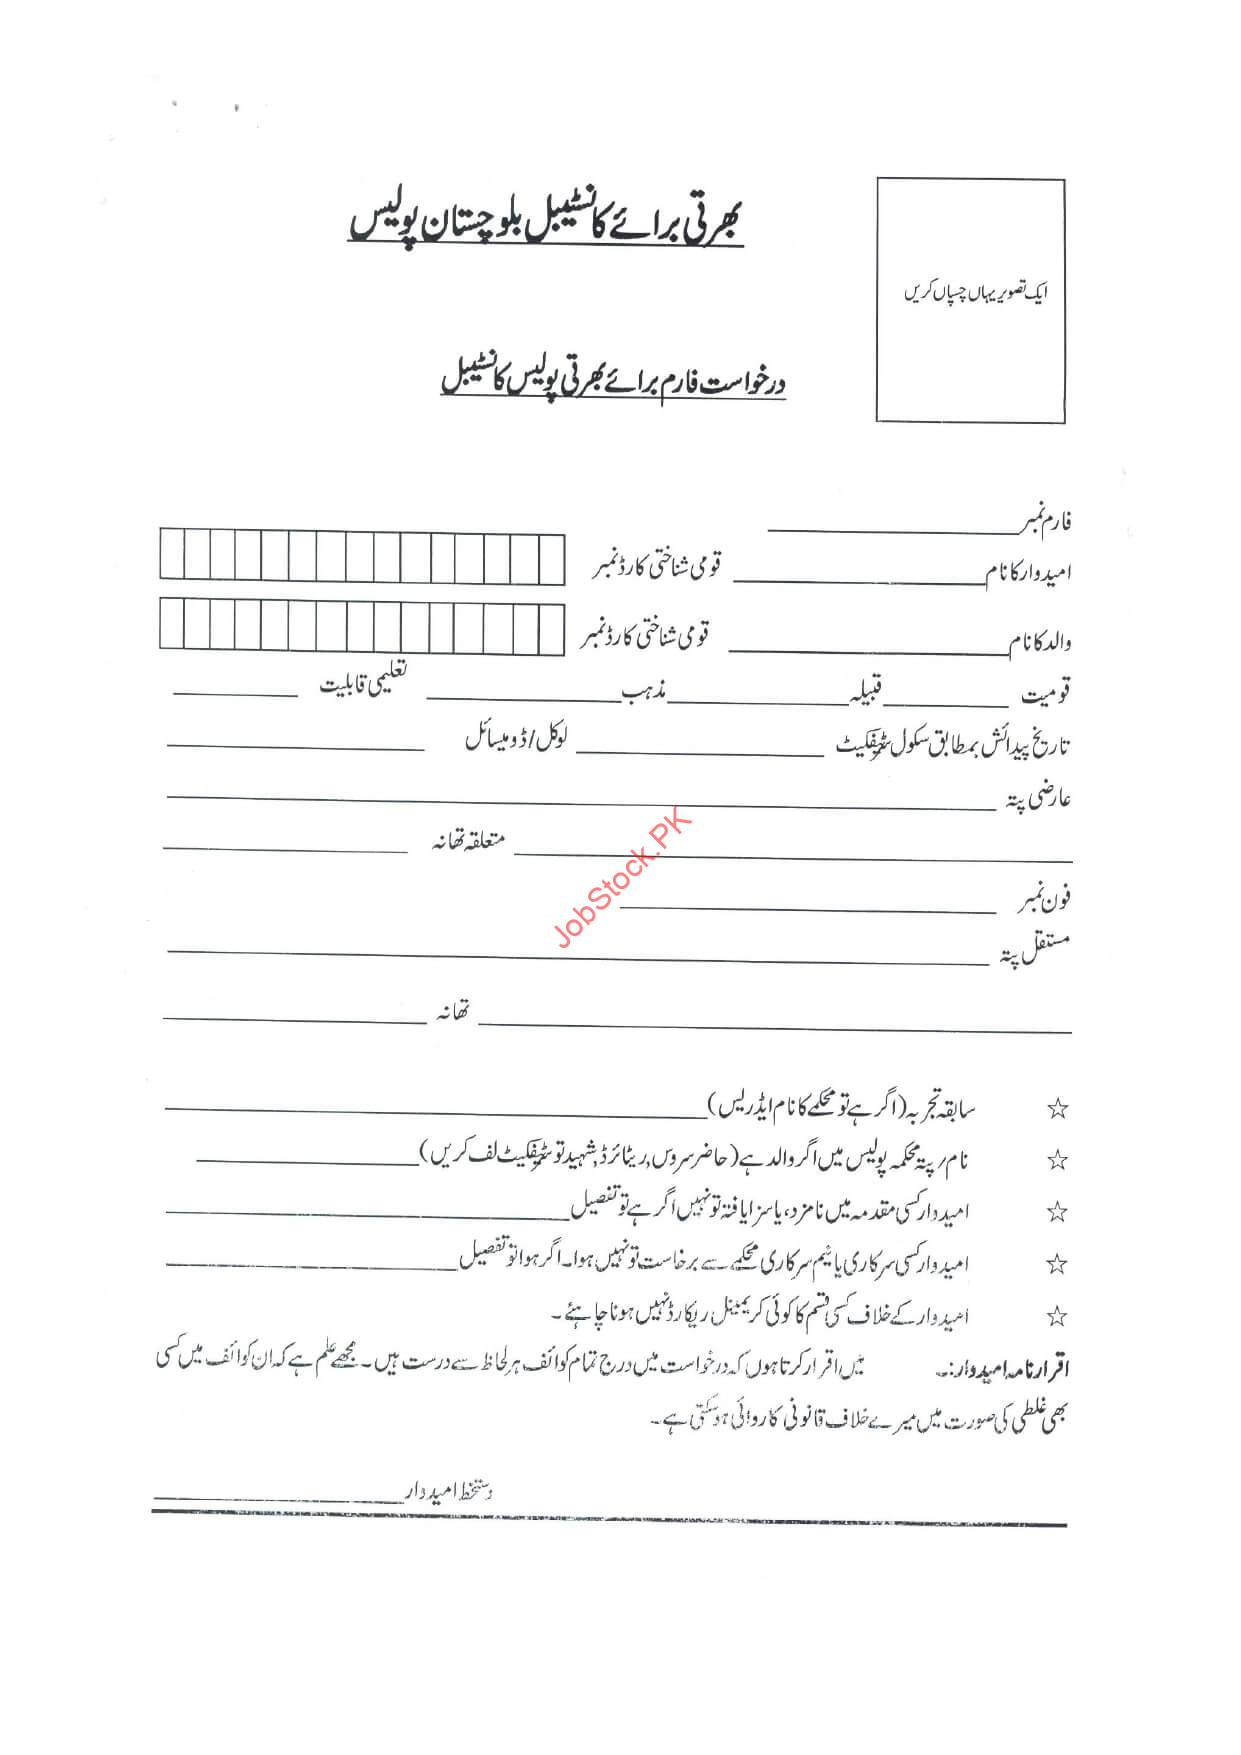 Balochistan Police Jobs 2022 Application Form Page 01